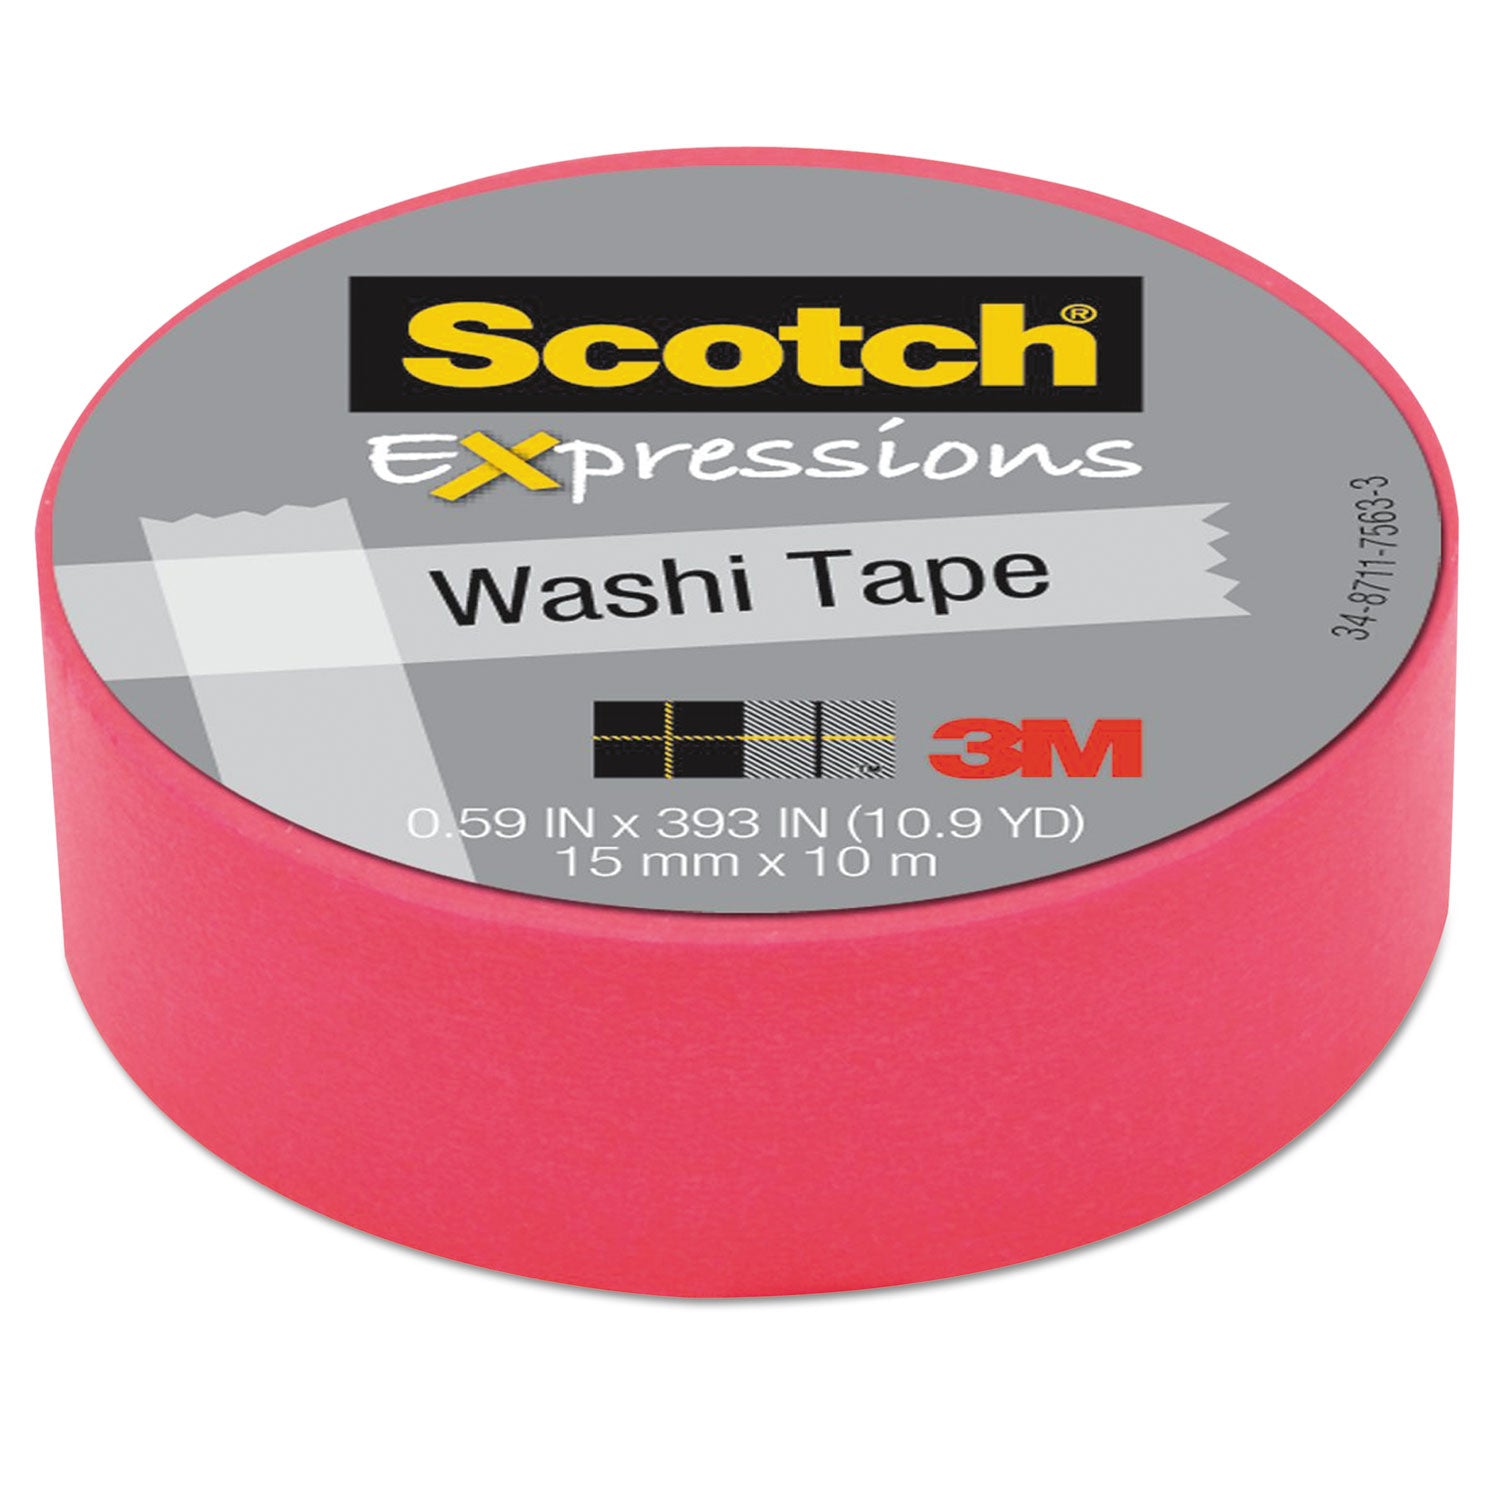 expressions-washi-tape-125-core-059-x-3275-ft-neon-pink_mmmc314pnk - 1